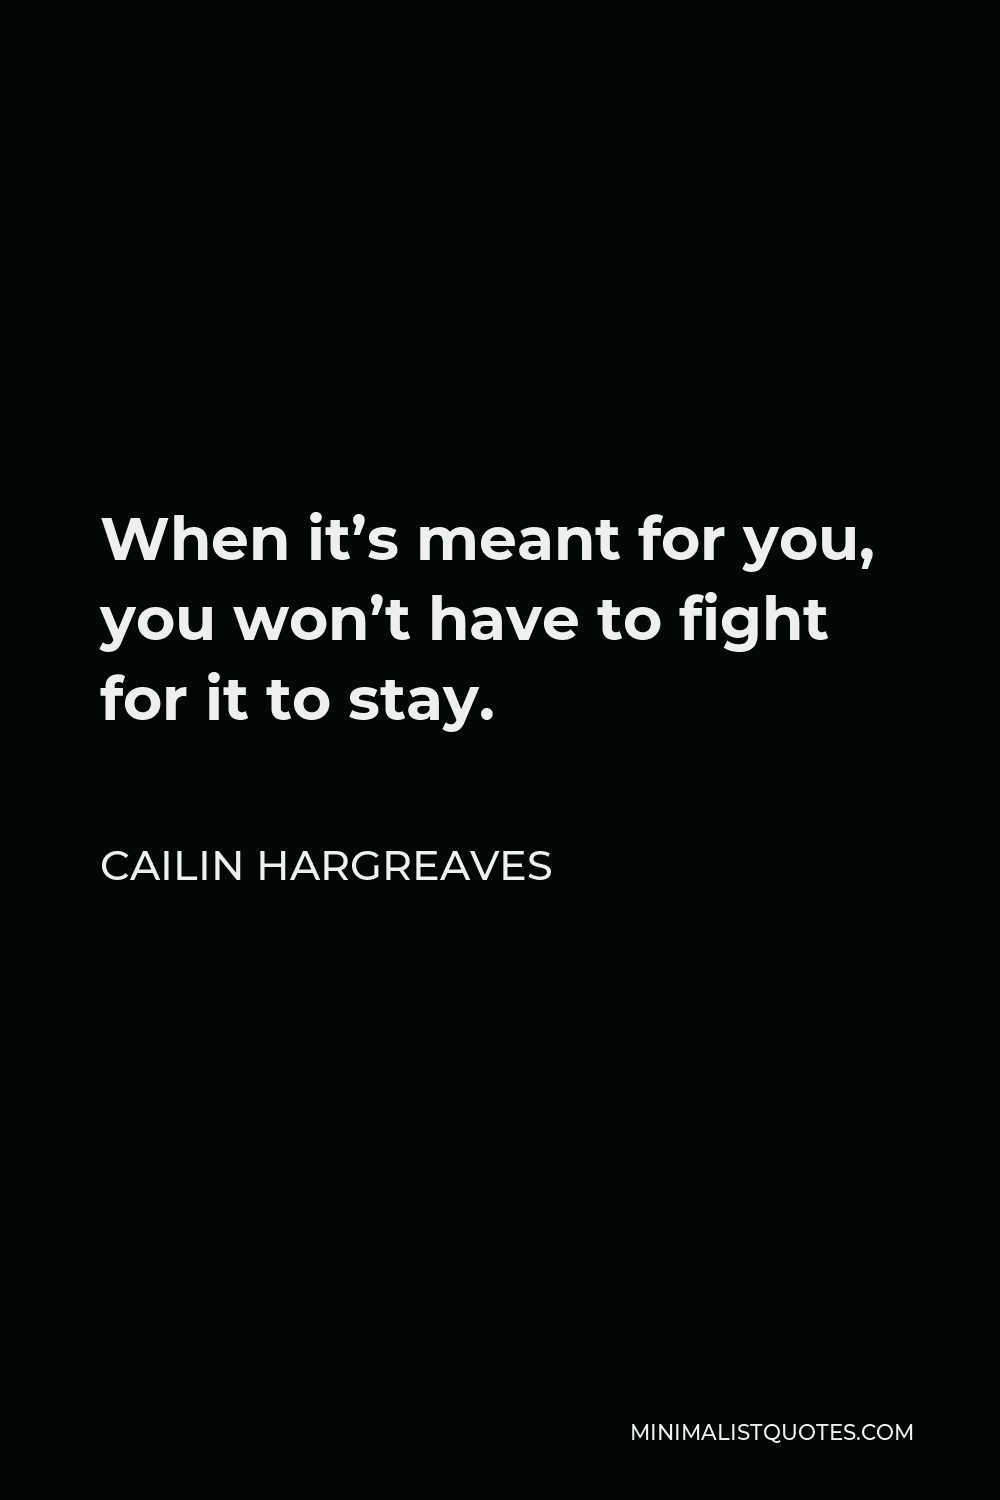 Cailin Hargreaves Quote - When it’s meant for you, you won’t have to fight for it to stay.